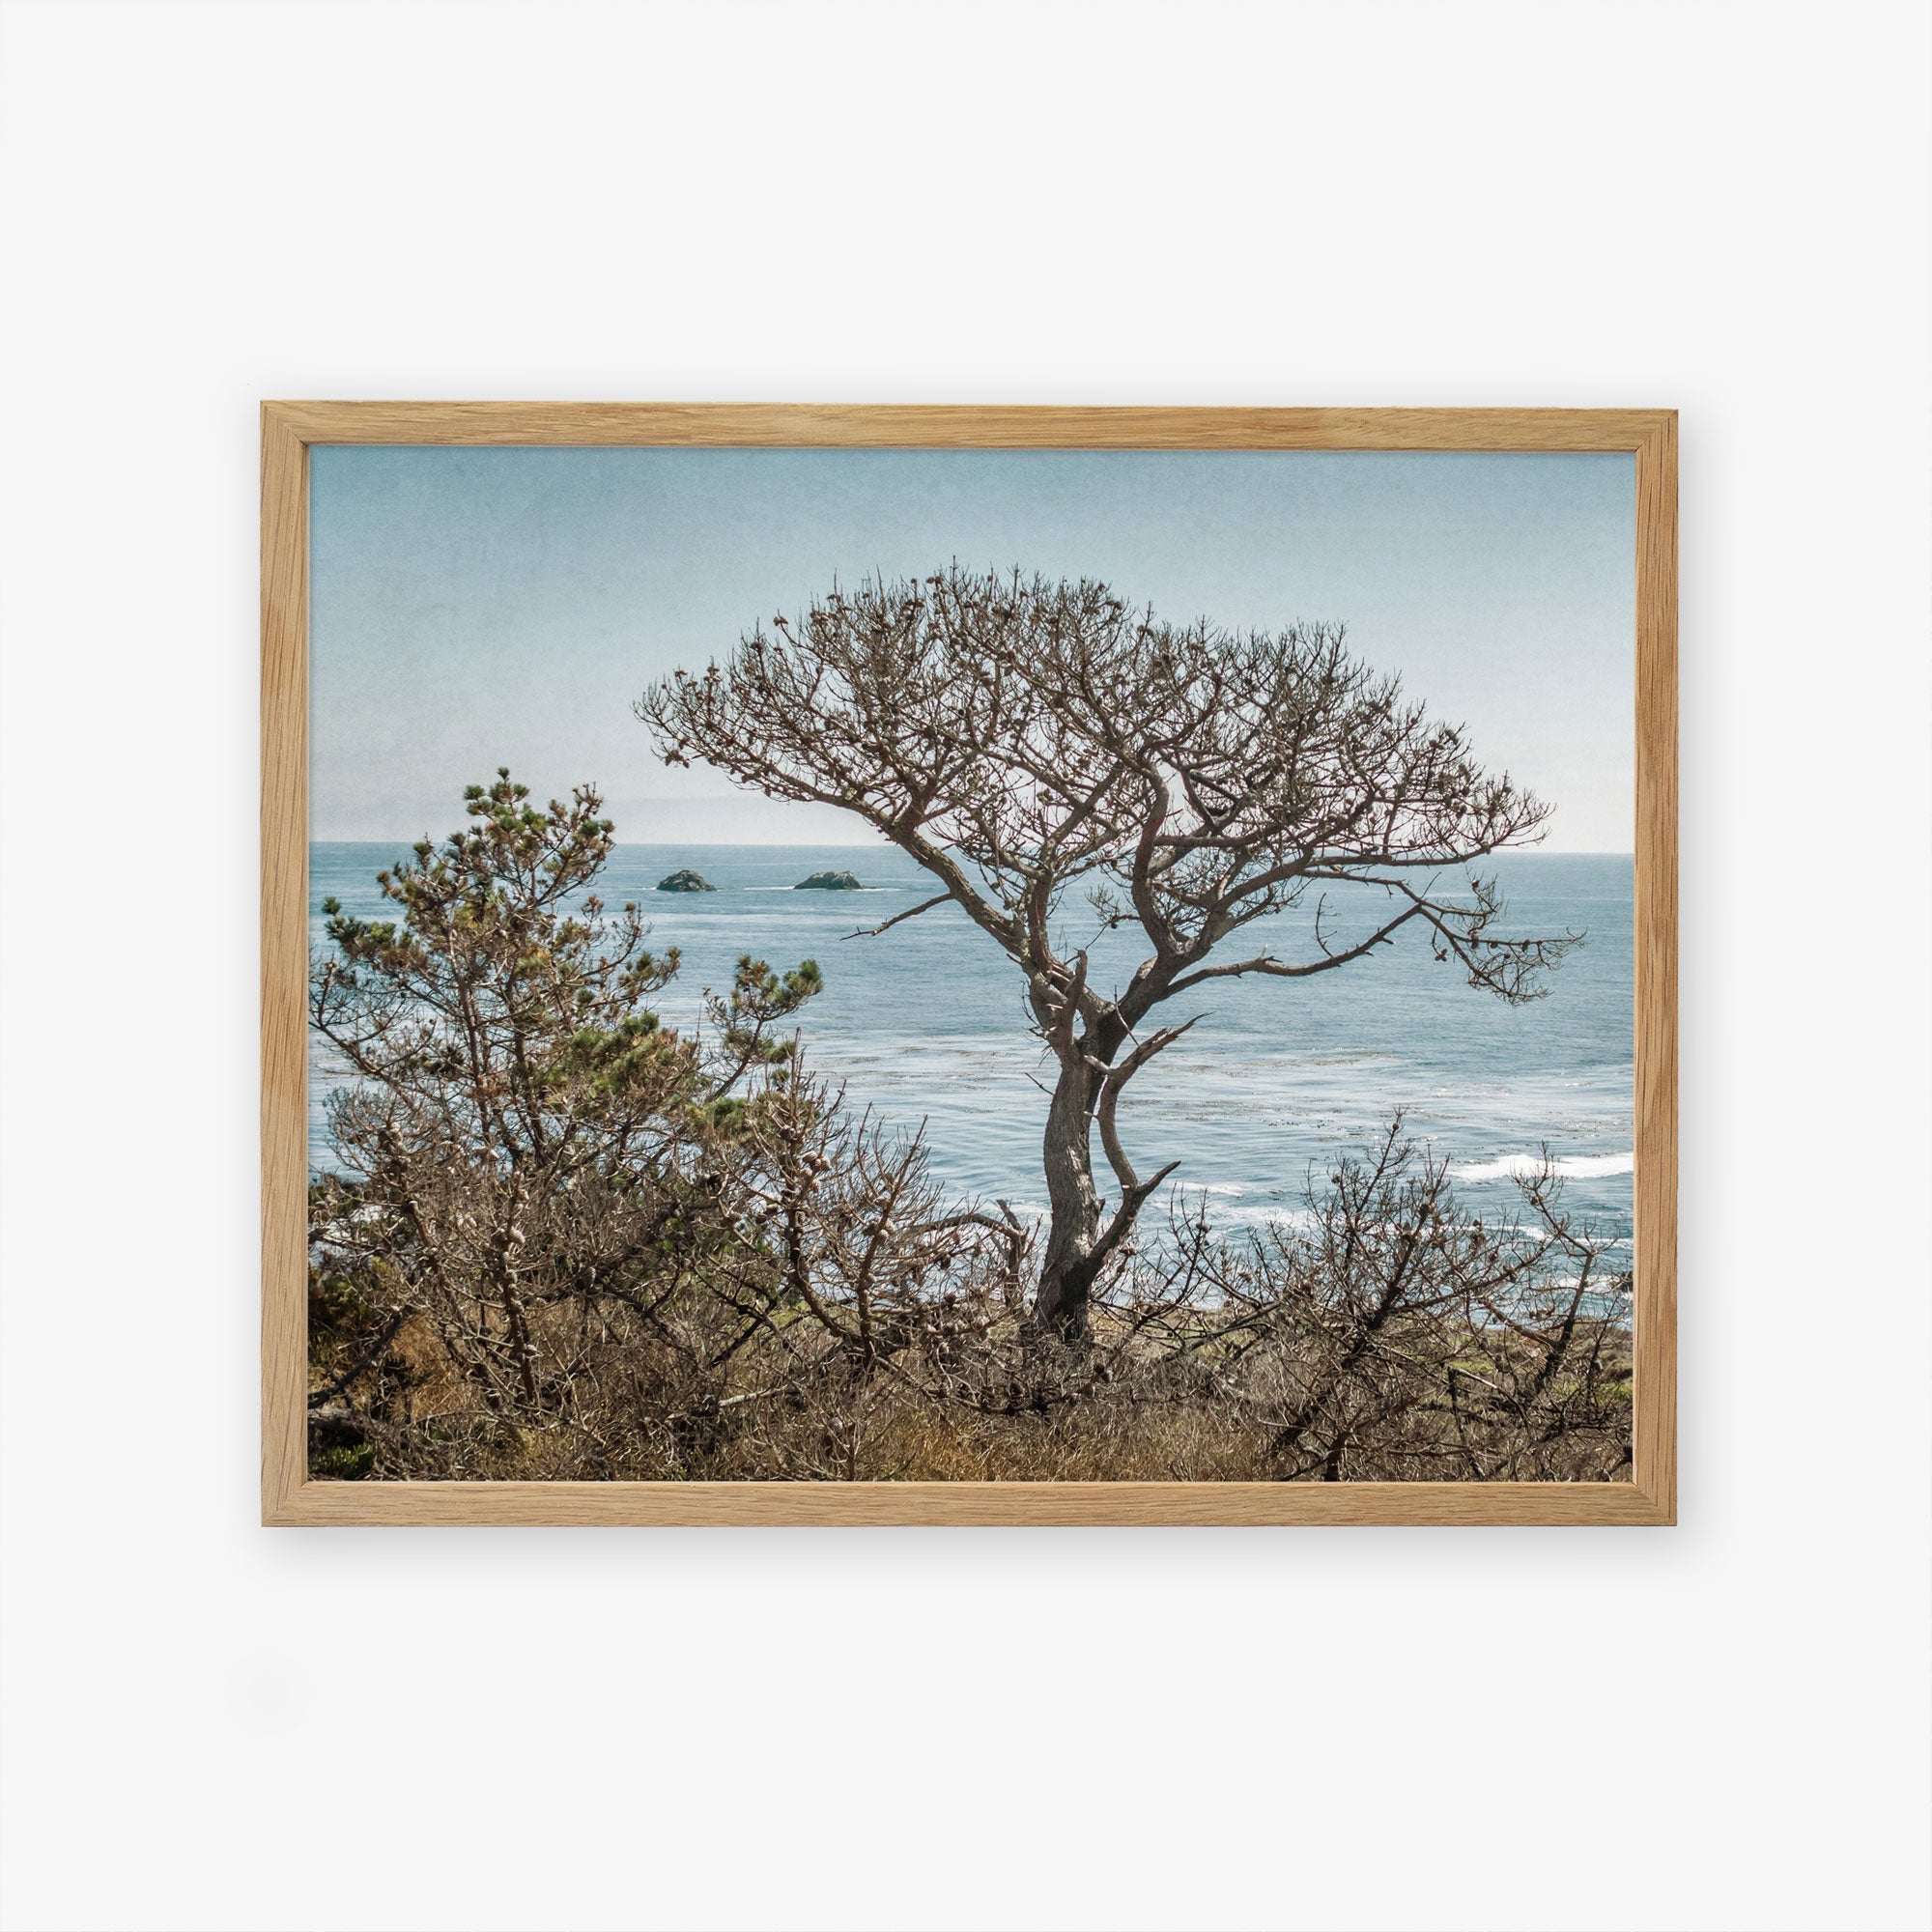 A framed picture of California Landscape Art in Big Sur, &#39;Wind Blown Tree&#39; by Offley Green, with twisted branches overlooking a calm sea, captured on archival photographic paper, with distant islands visible under a clear sky.